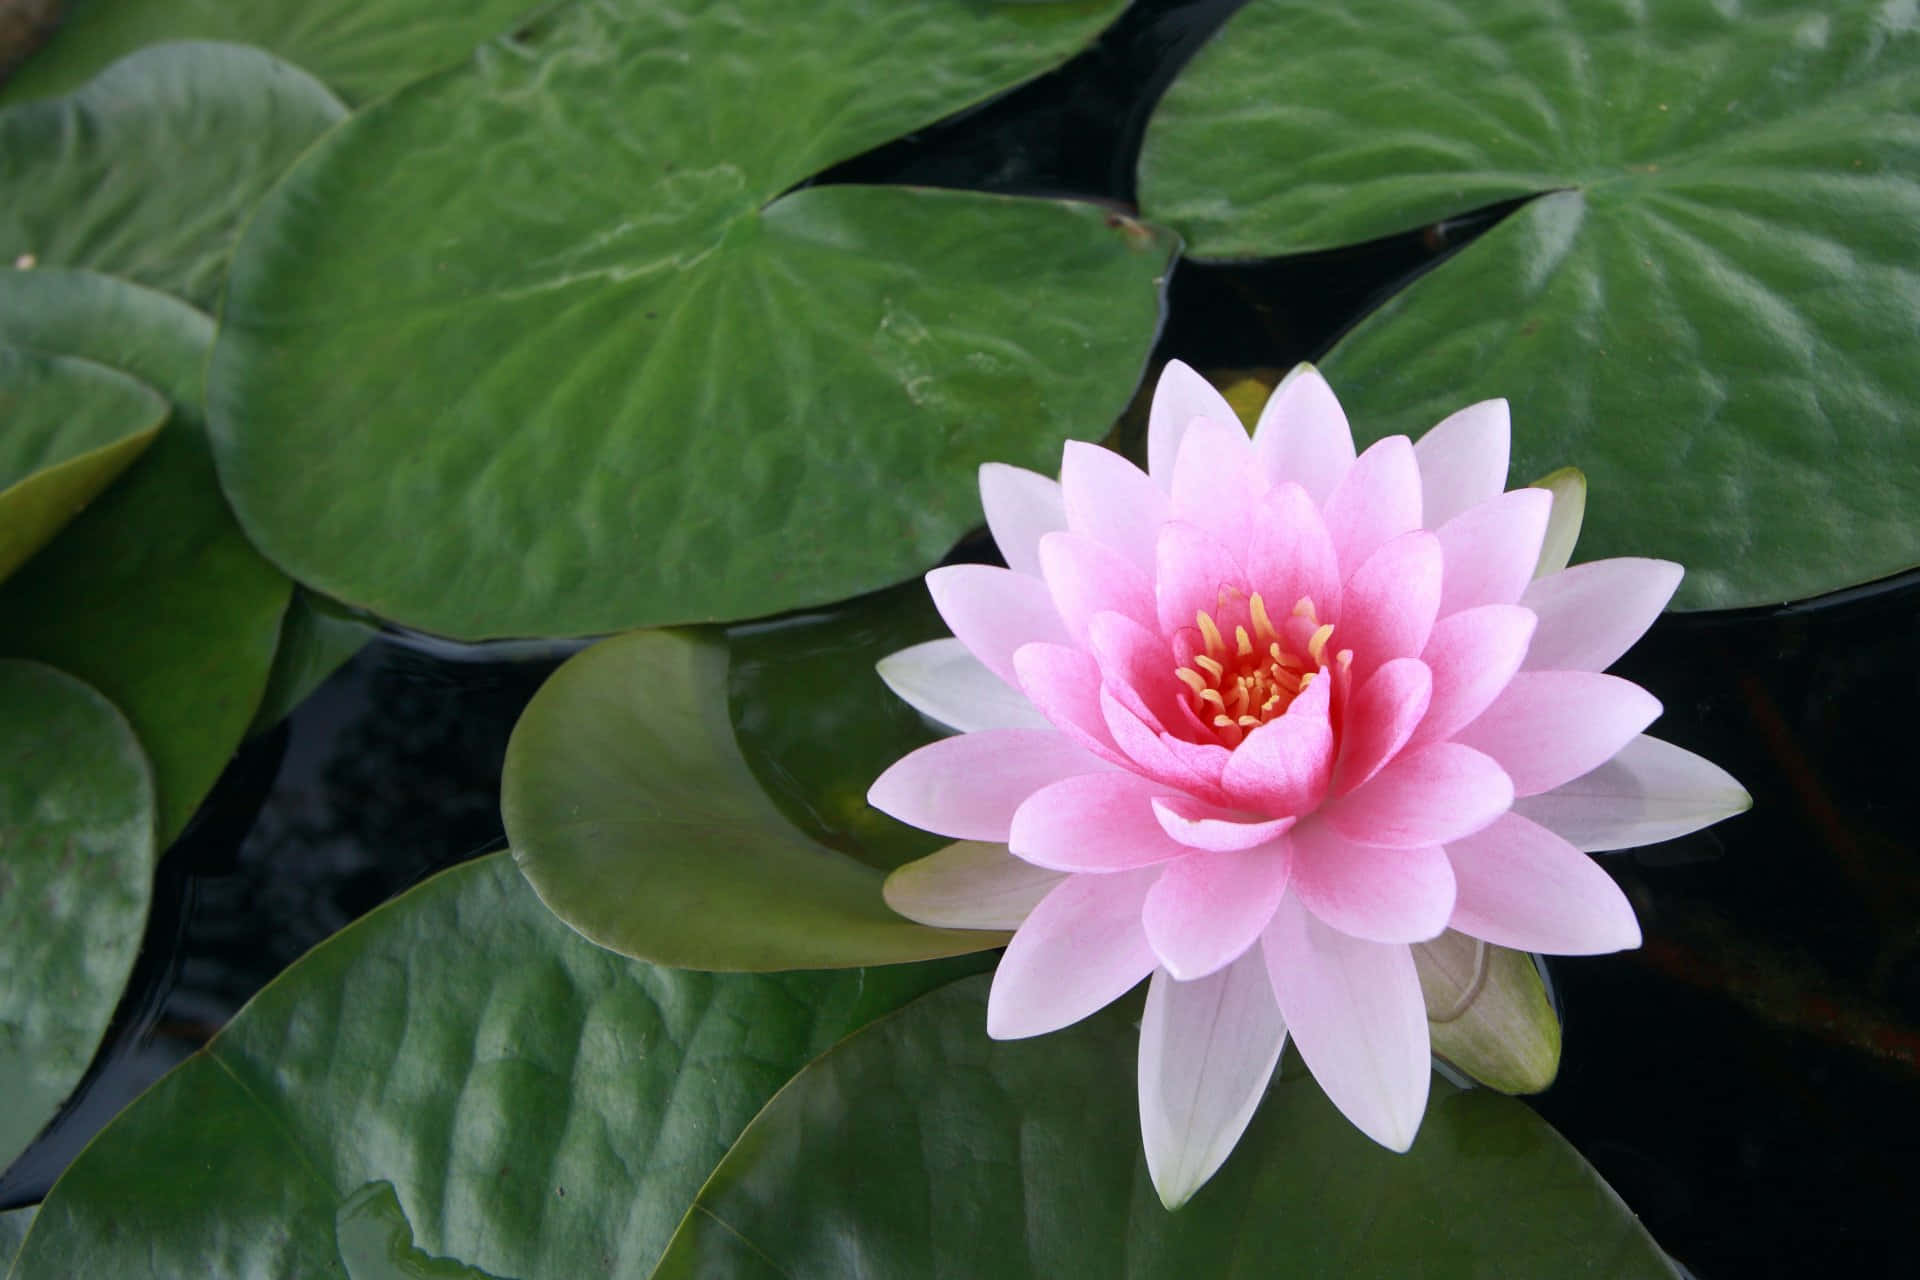 A beautiful lotus flower emerging in a pond, setting the perfect backdrop for a peaceful moment.